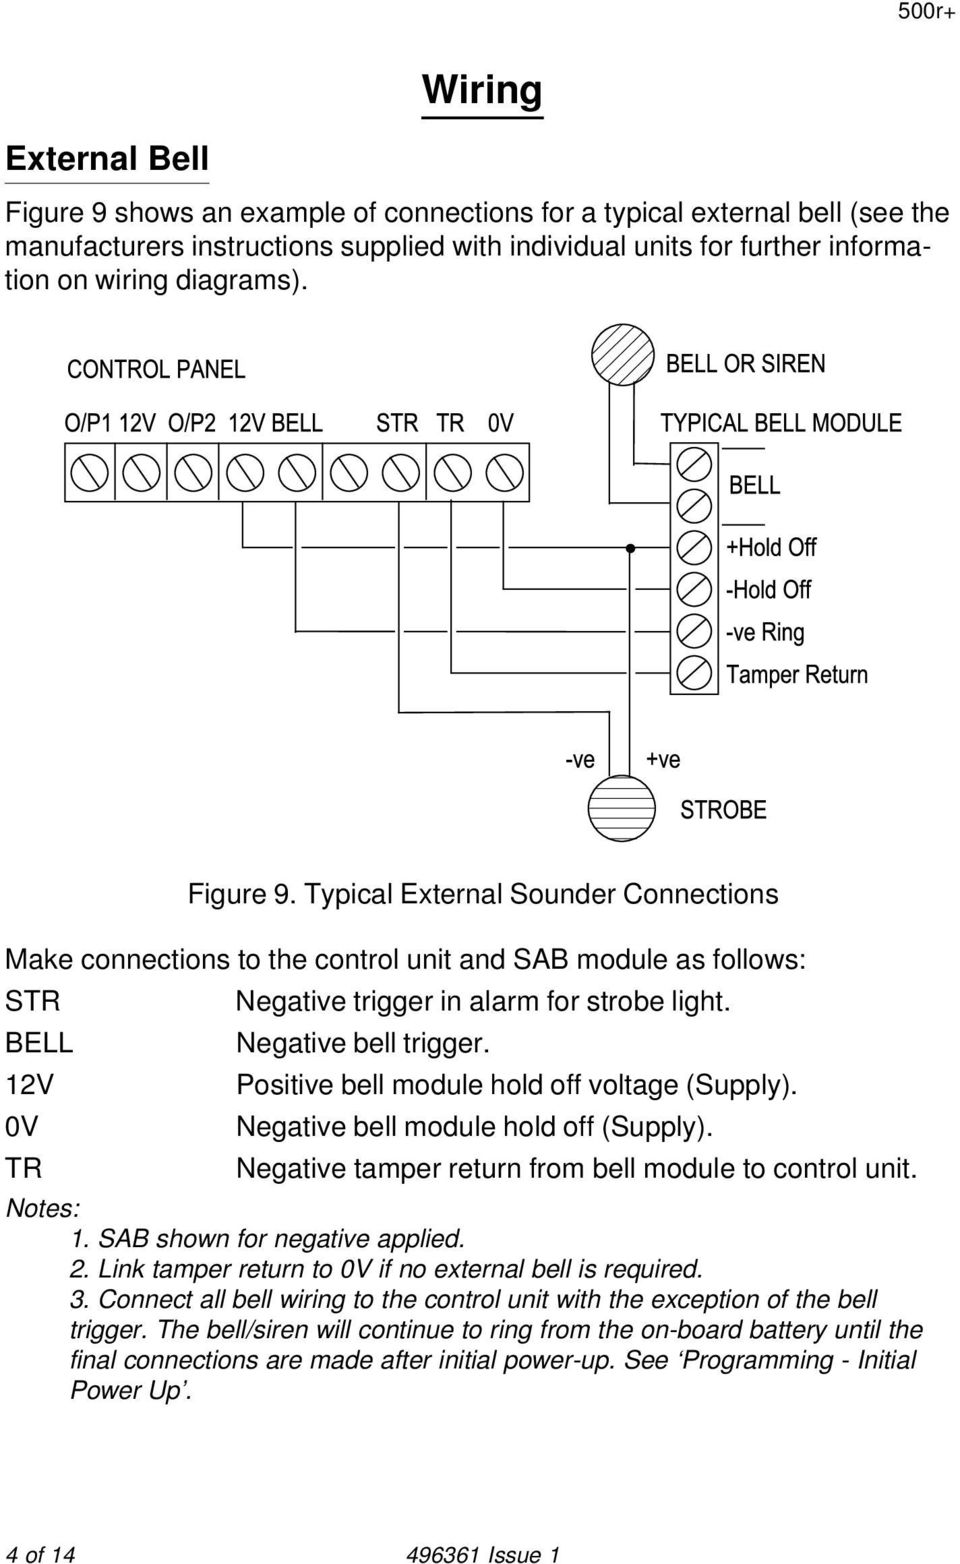 12V Positive bell module hold off voltage (Supply). 0V Negative bell module hold off (Supply). TR Negative tamper return from bell module to control unit. Notes: 1. SAB shown for negative applied. 2.